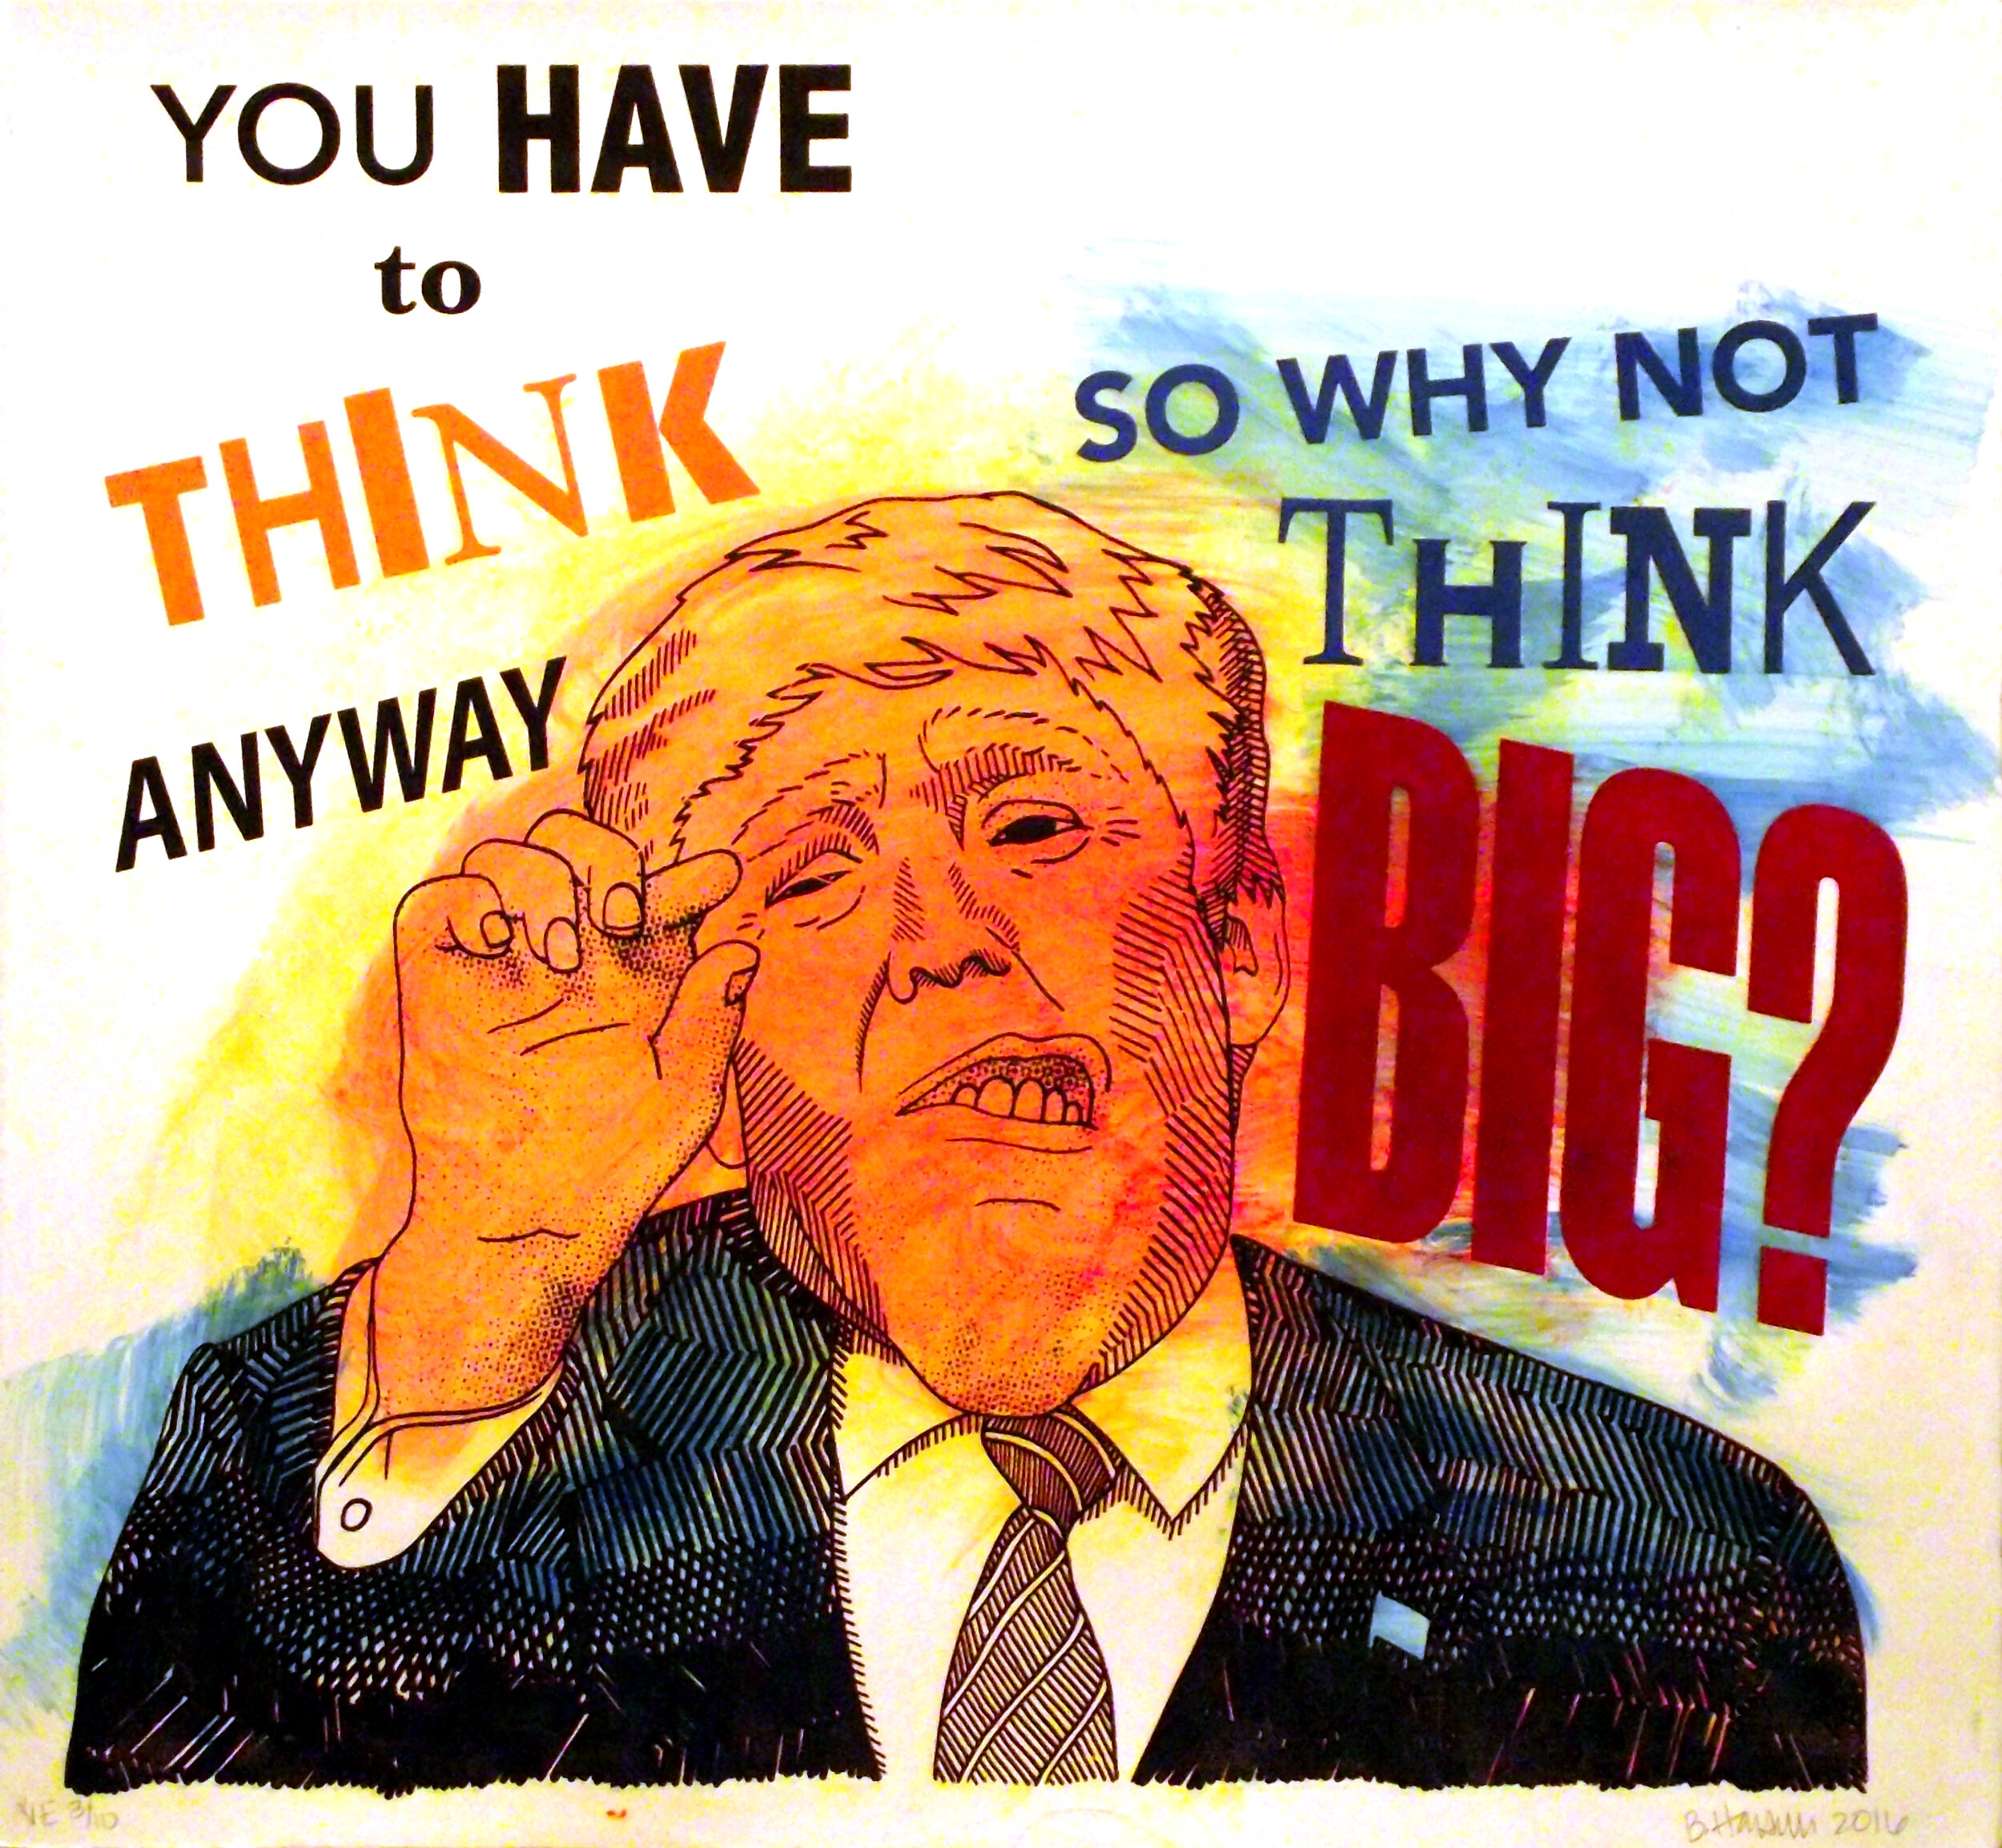 Why Not Think Big? (2016)